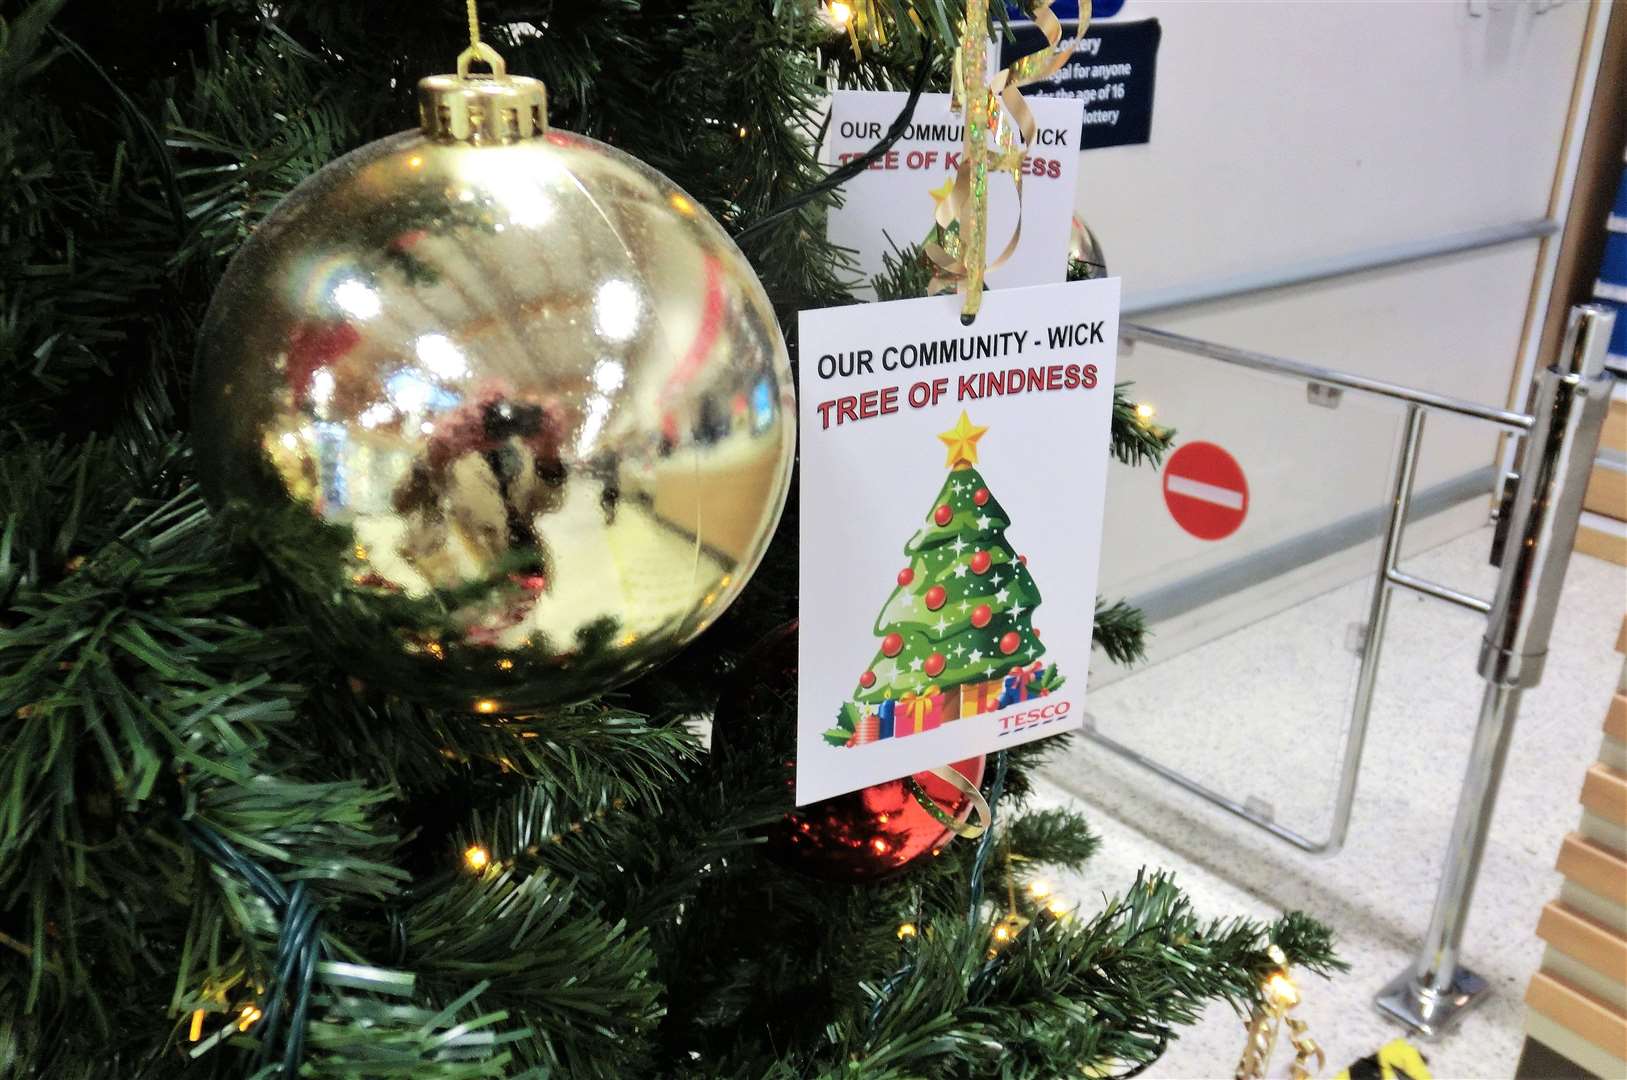 The supermarket invites shoppers to take a gift tag from the tree, purchase the gift and then place it in the designated collection points beside the checkouts.